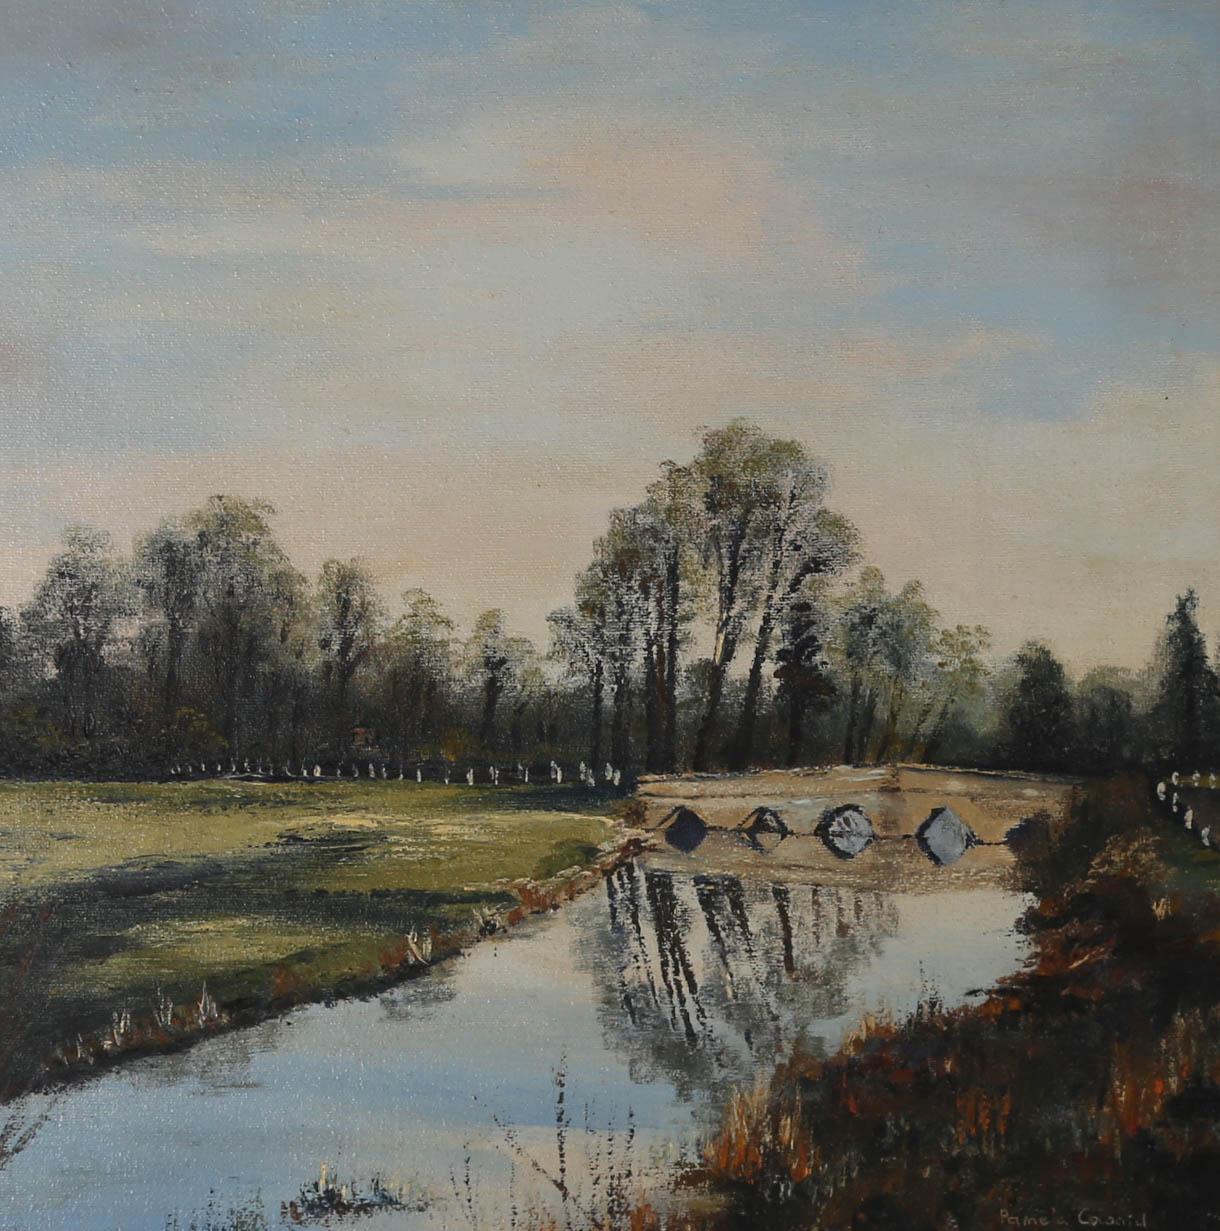 A delightful depiction of a river landscape, painted by British artist Pamela Coward. In the foreground reeds and grasses line the river bank in expressive autumn colours. A beautiful village bridge leads on to woodland trees that shimmer in the